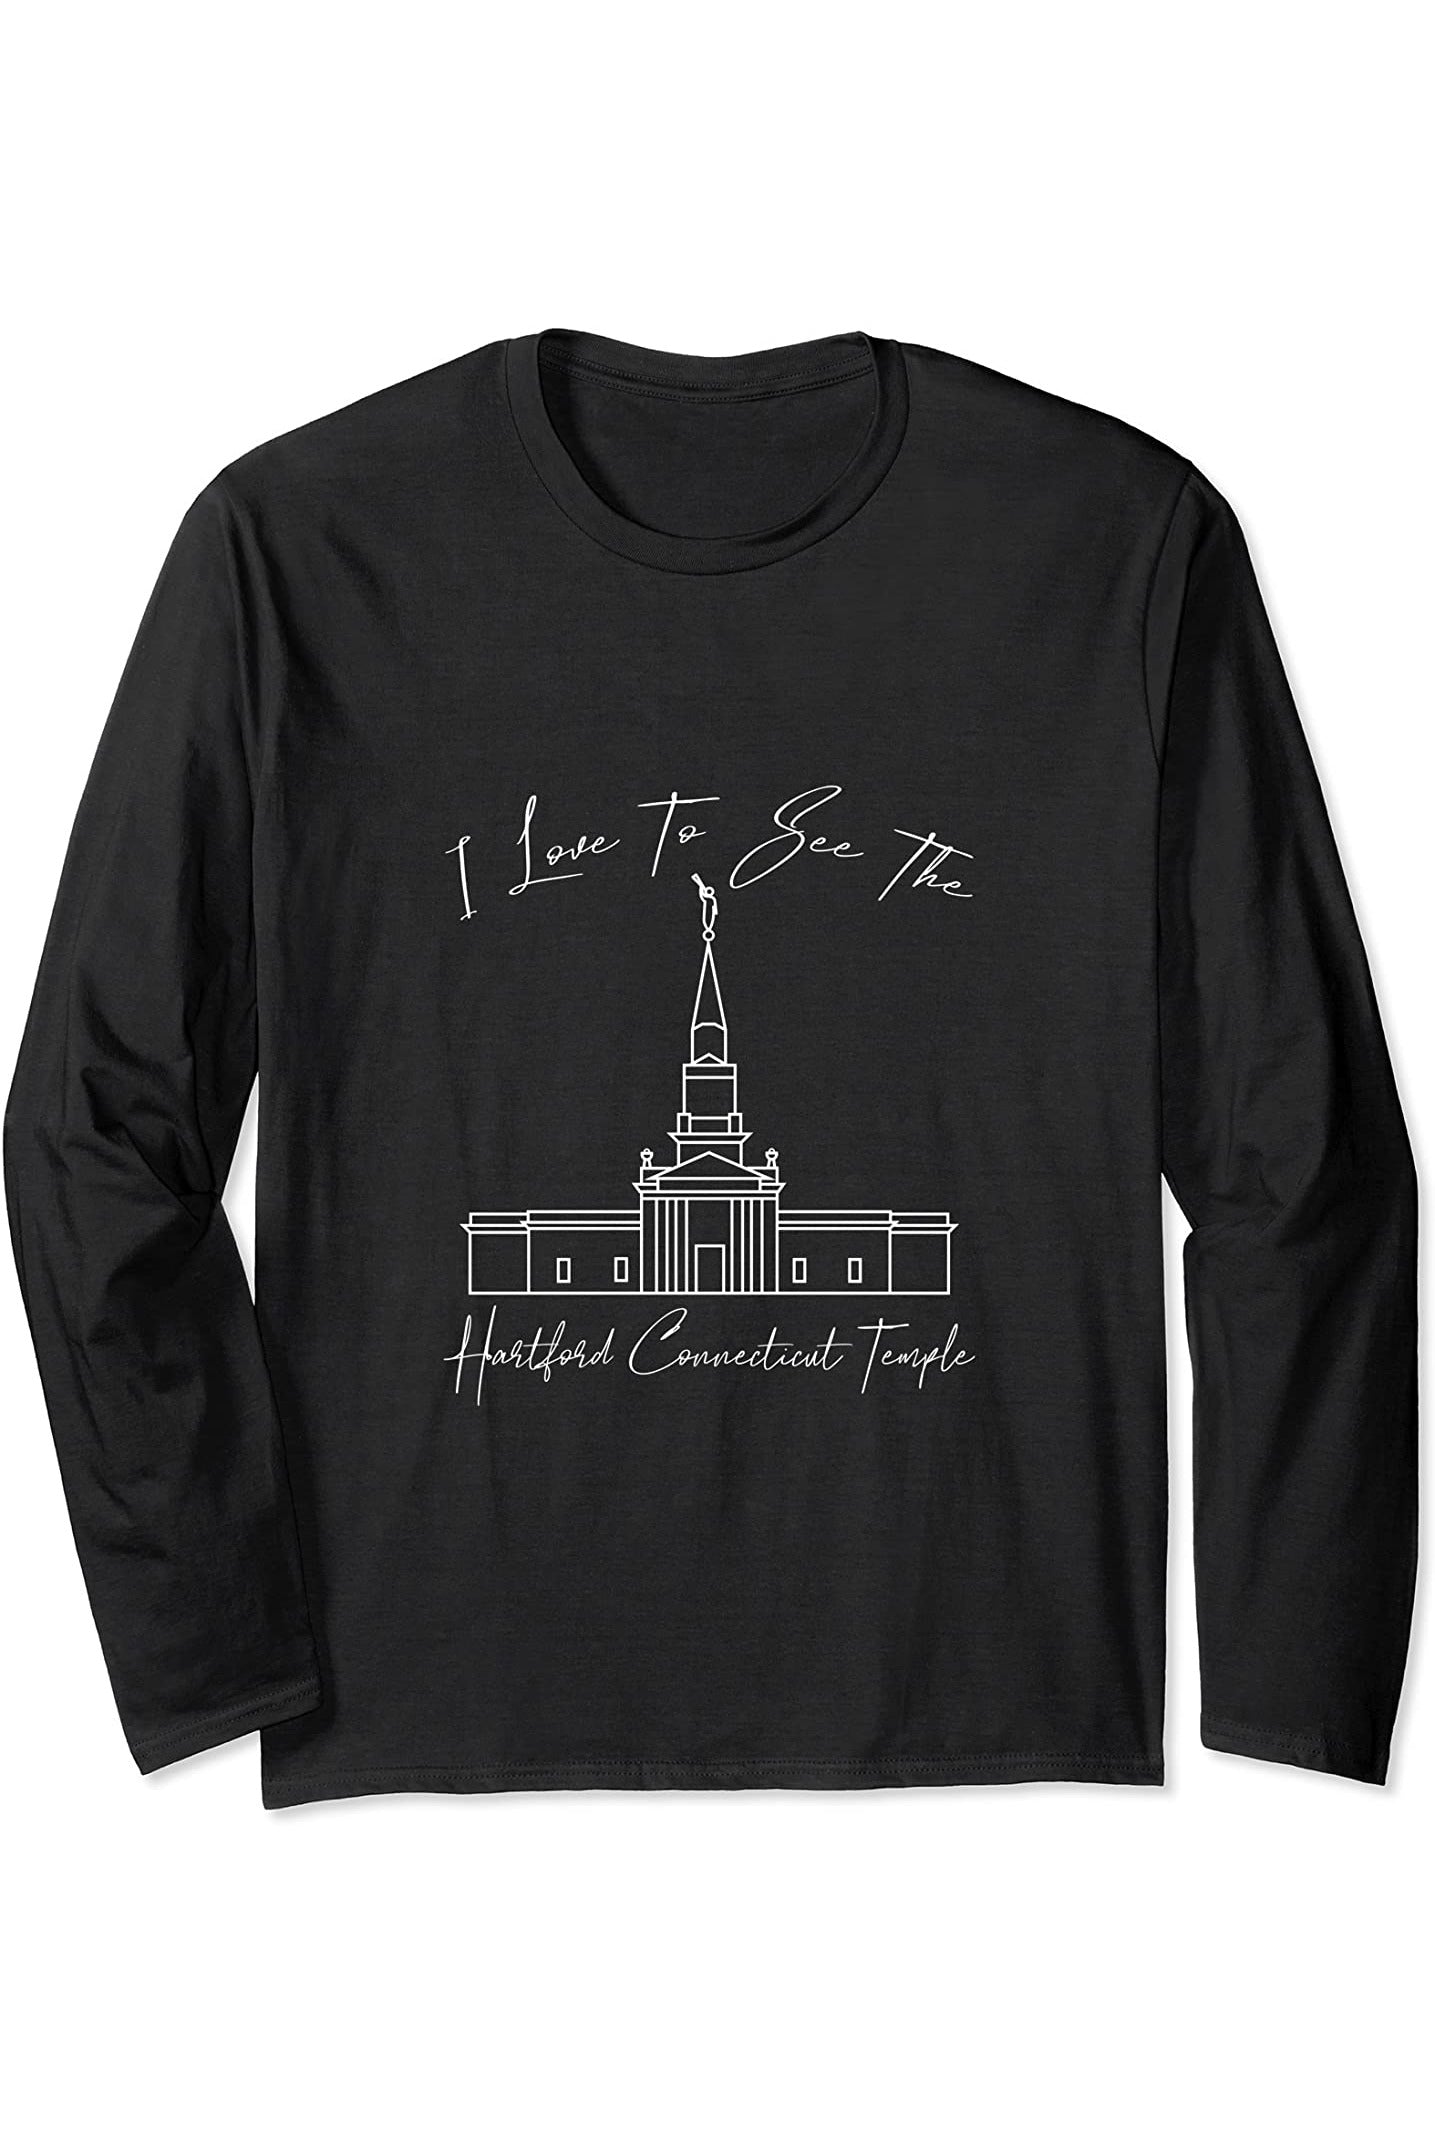 Hartford Connecticut Temple Long Sleeve T-Shirt - Calligraphy Style (English) US